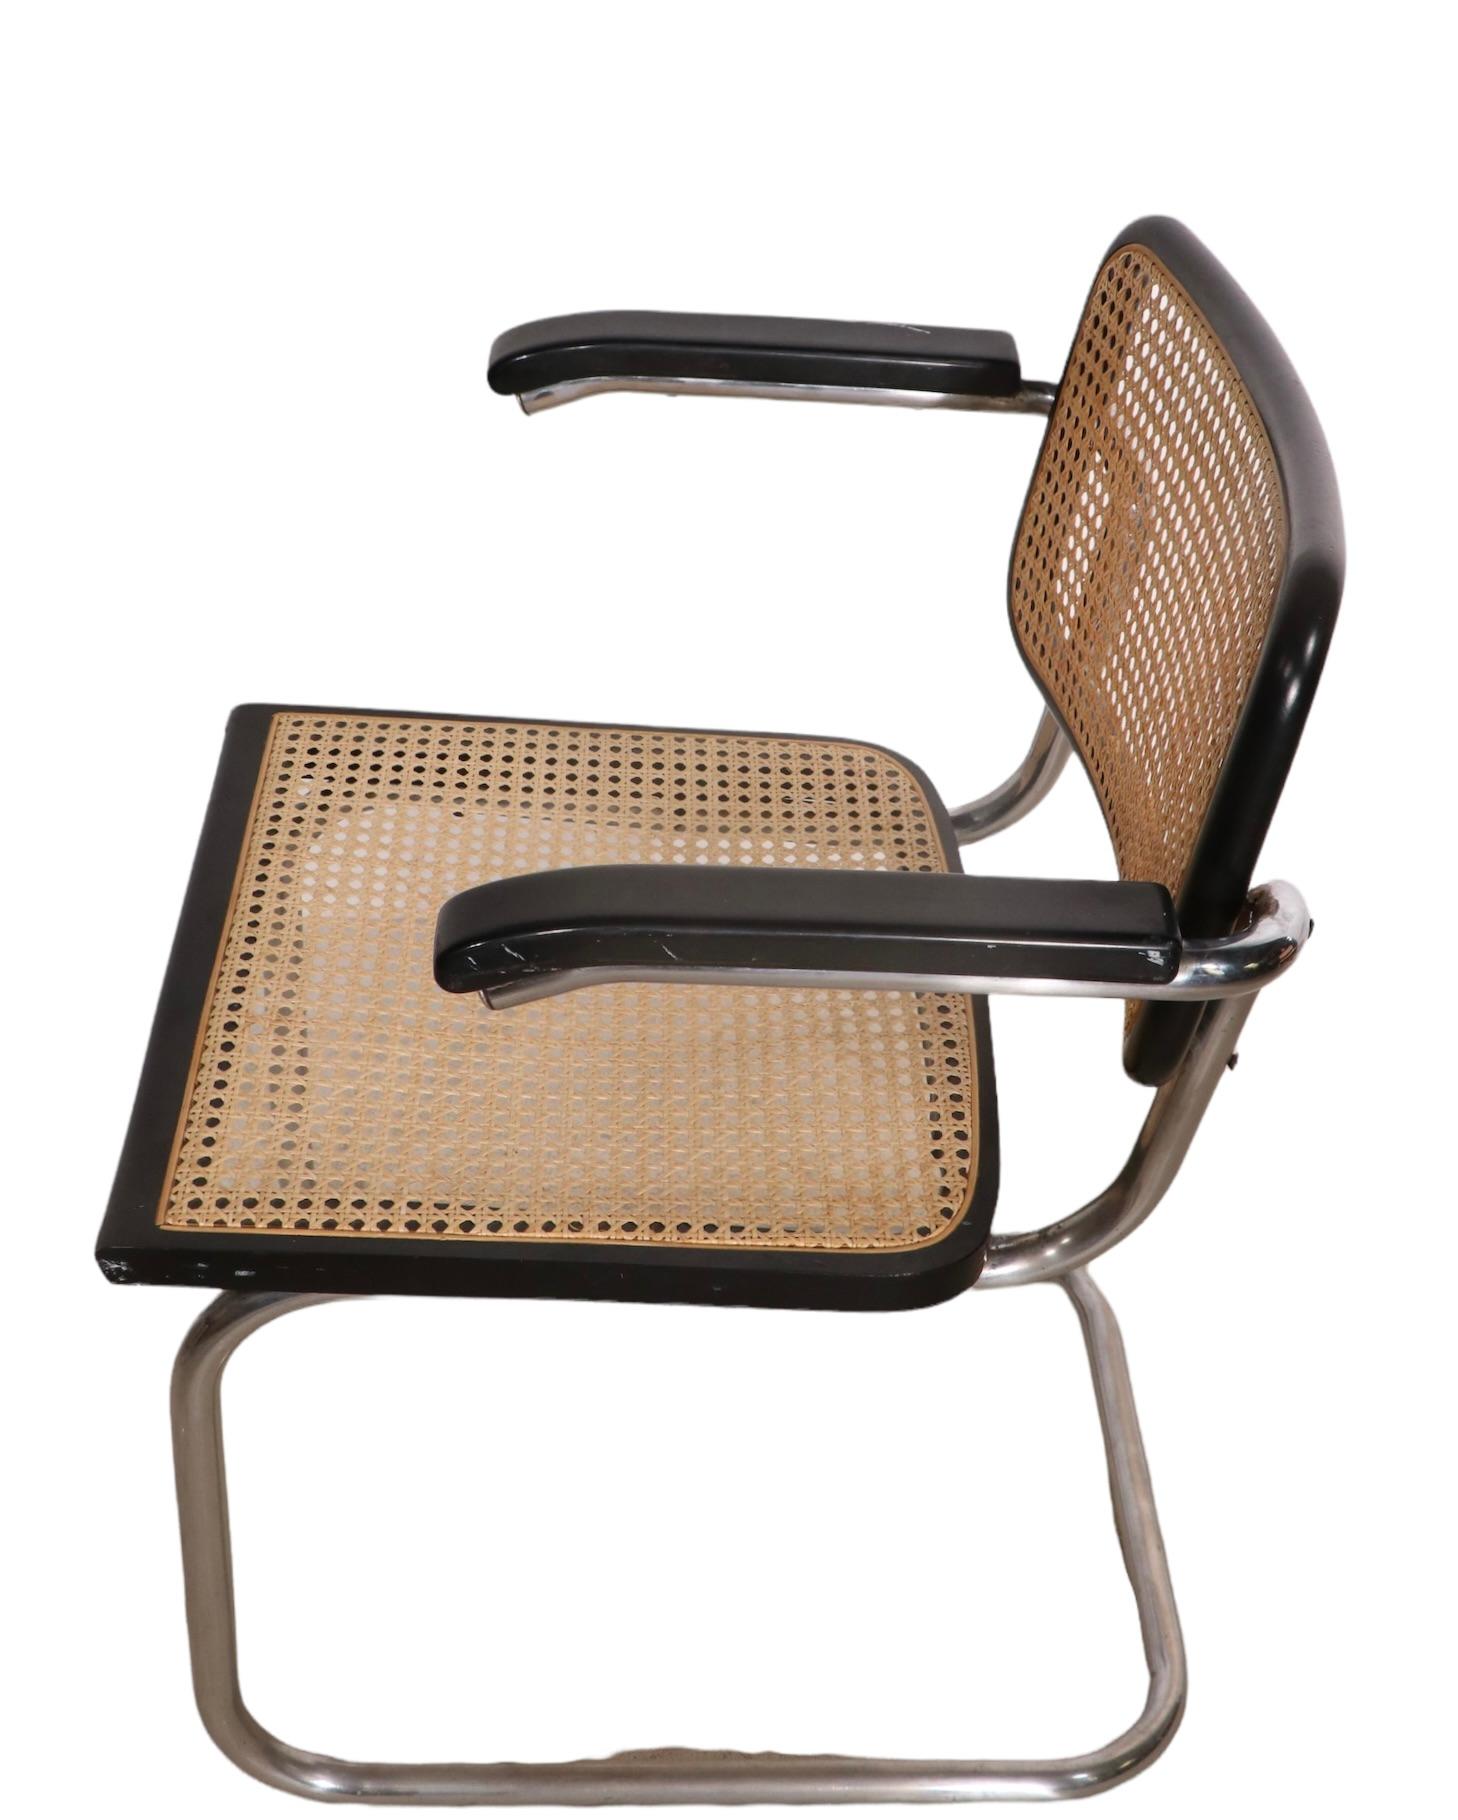 Chic set of vintage Cesca chairs designed by Marcel Breuer, circa 1970's Made in Italy after the Bauhaus originals. The set consists of four arm chairs, having cantilevered chrome frames, wood frames in original black finish, and caned seats and